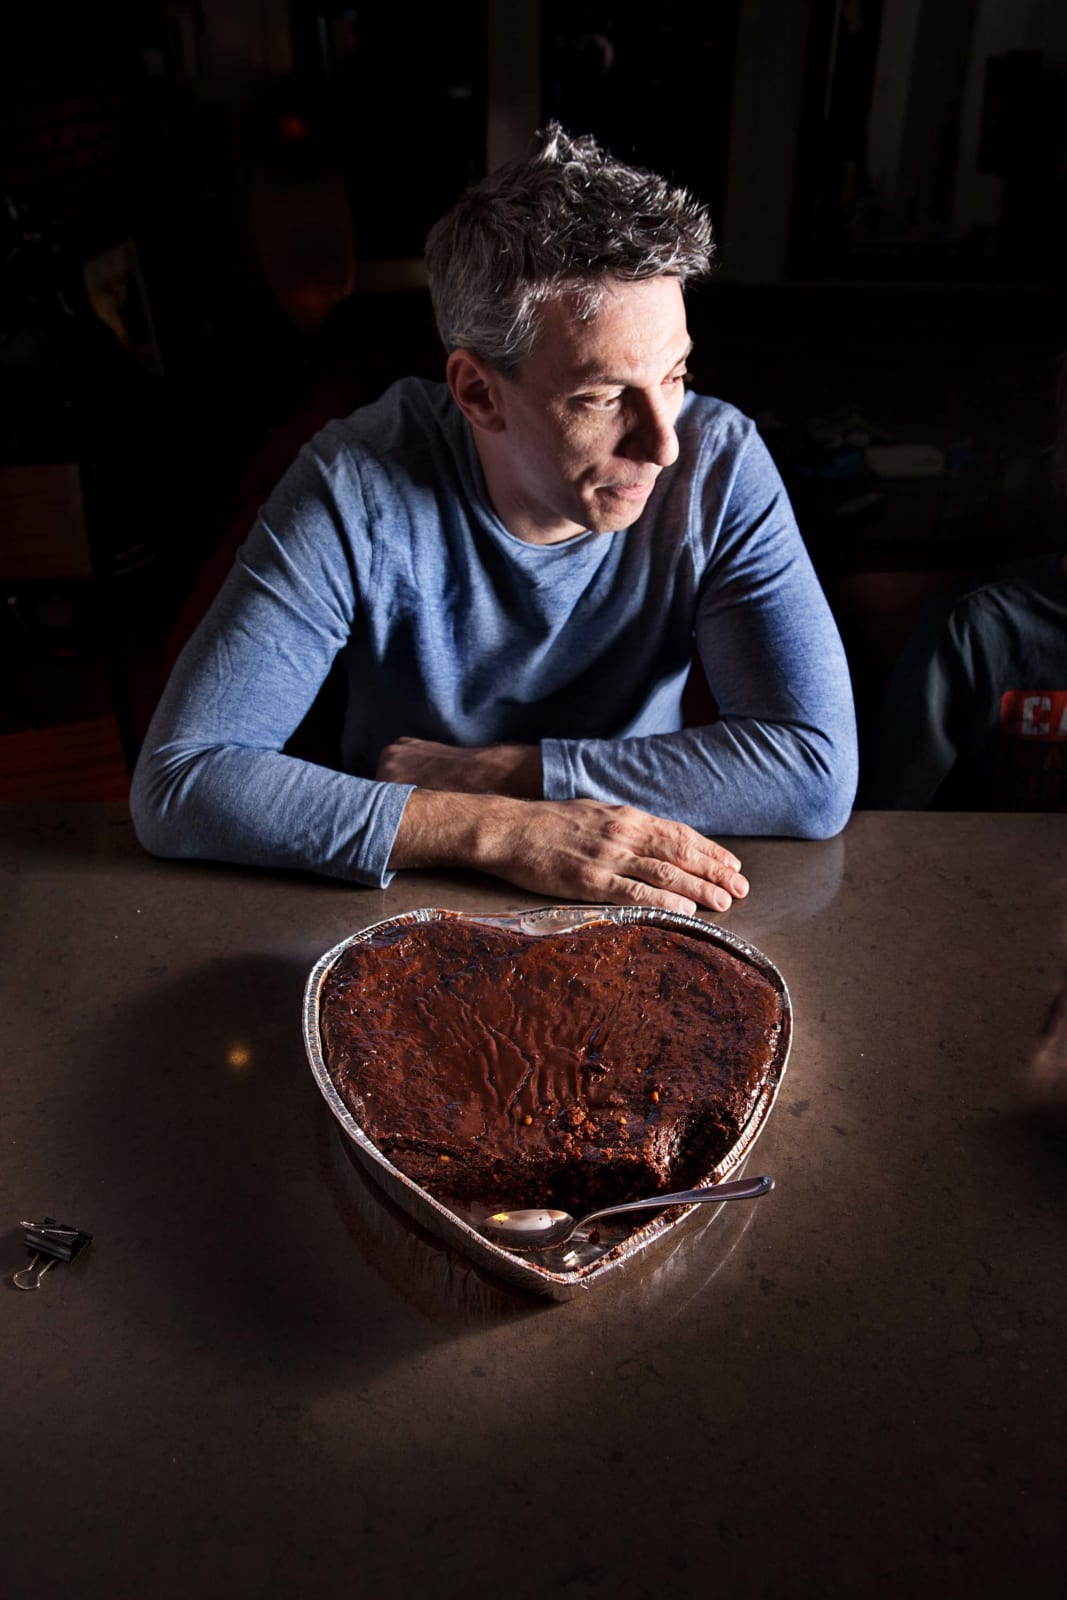 Elinor Carucci photograph of the artist's husband sitting at the table in a blue sweater with a heart shaped chocolate cake